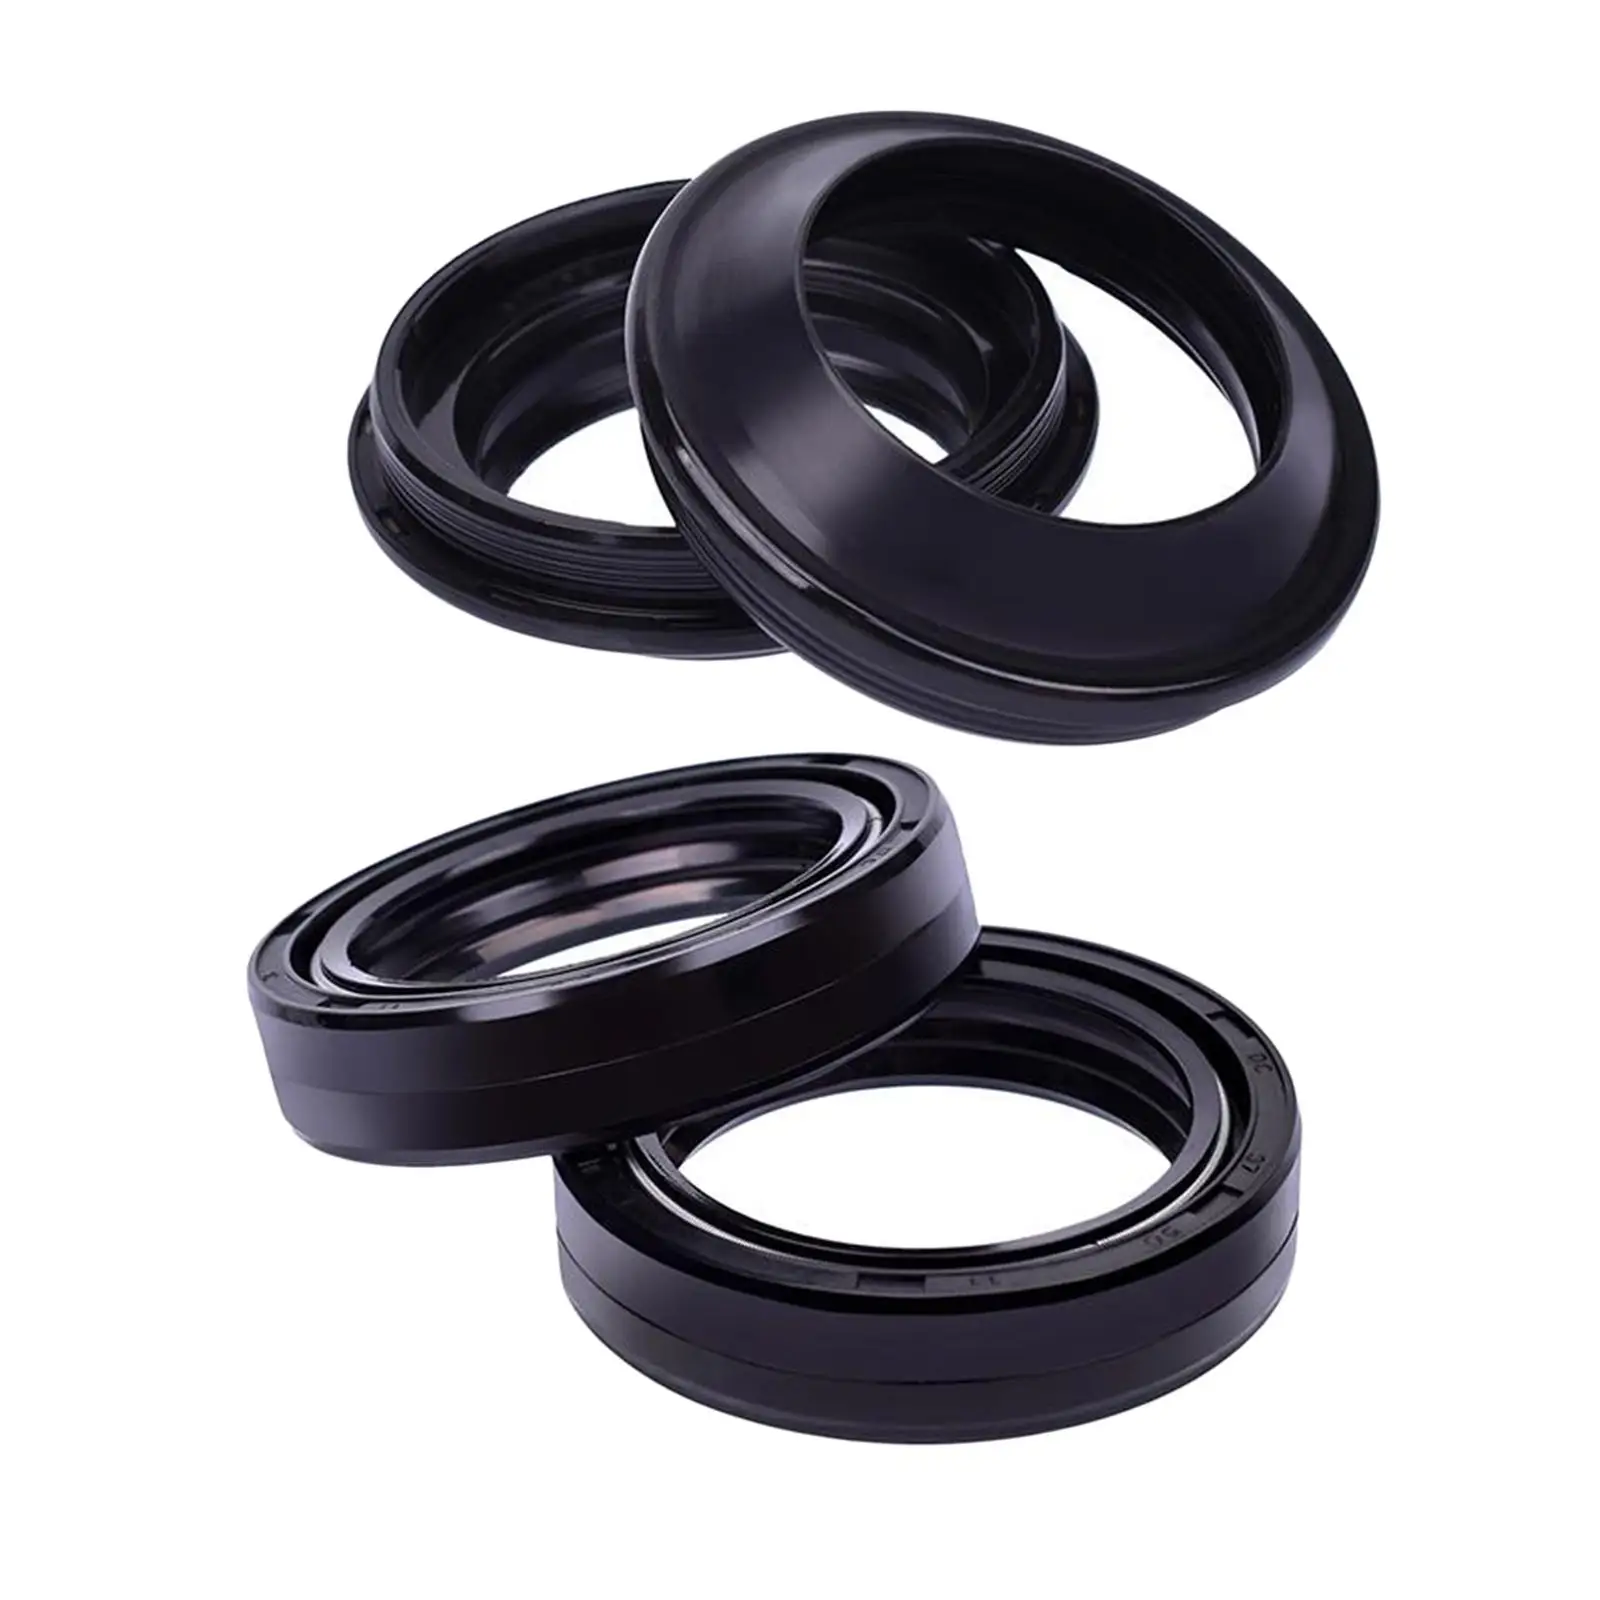 Motorcycle Oil Seals Dust Seals Kit Repair Parts 37x50x11mm Replacement for Honda CBR250RA Crf230L XR250R VFR750F Crf150rii